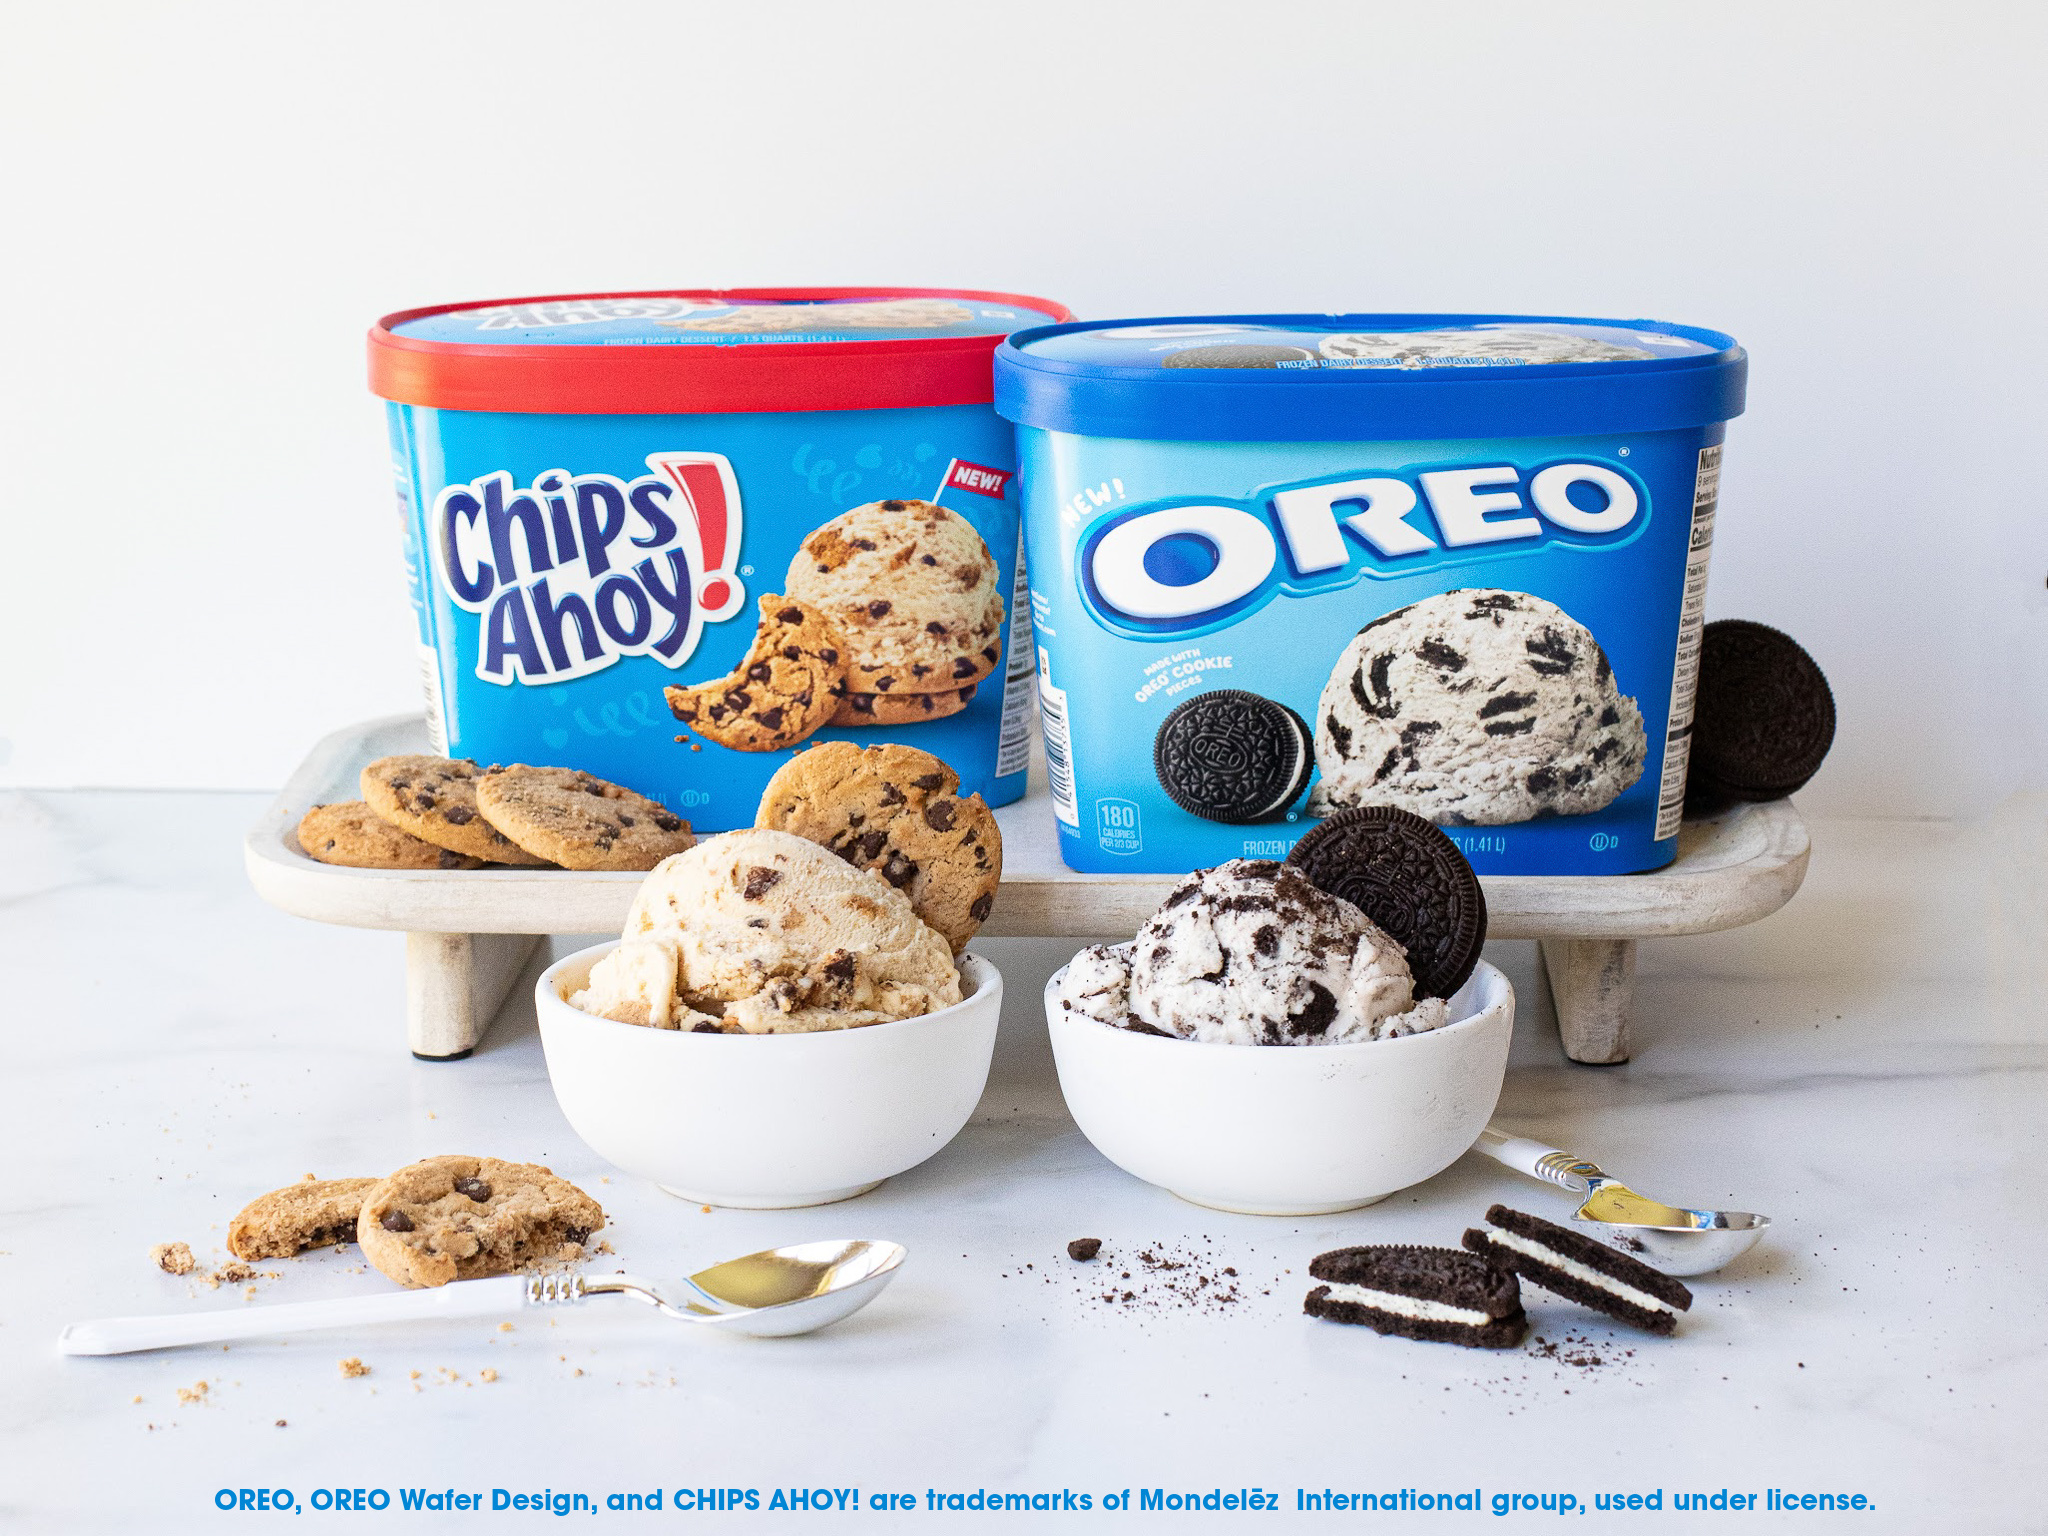 Bring The Fun Of OREO® and CHIPS AHOY!® To Your Freezer With New Delicious Frozen Treats – Save BIG At Publix